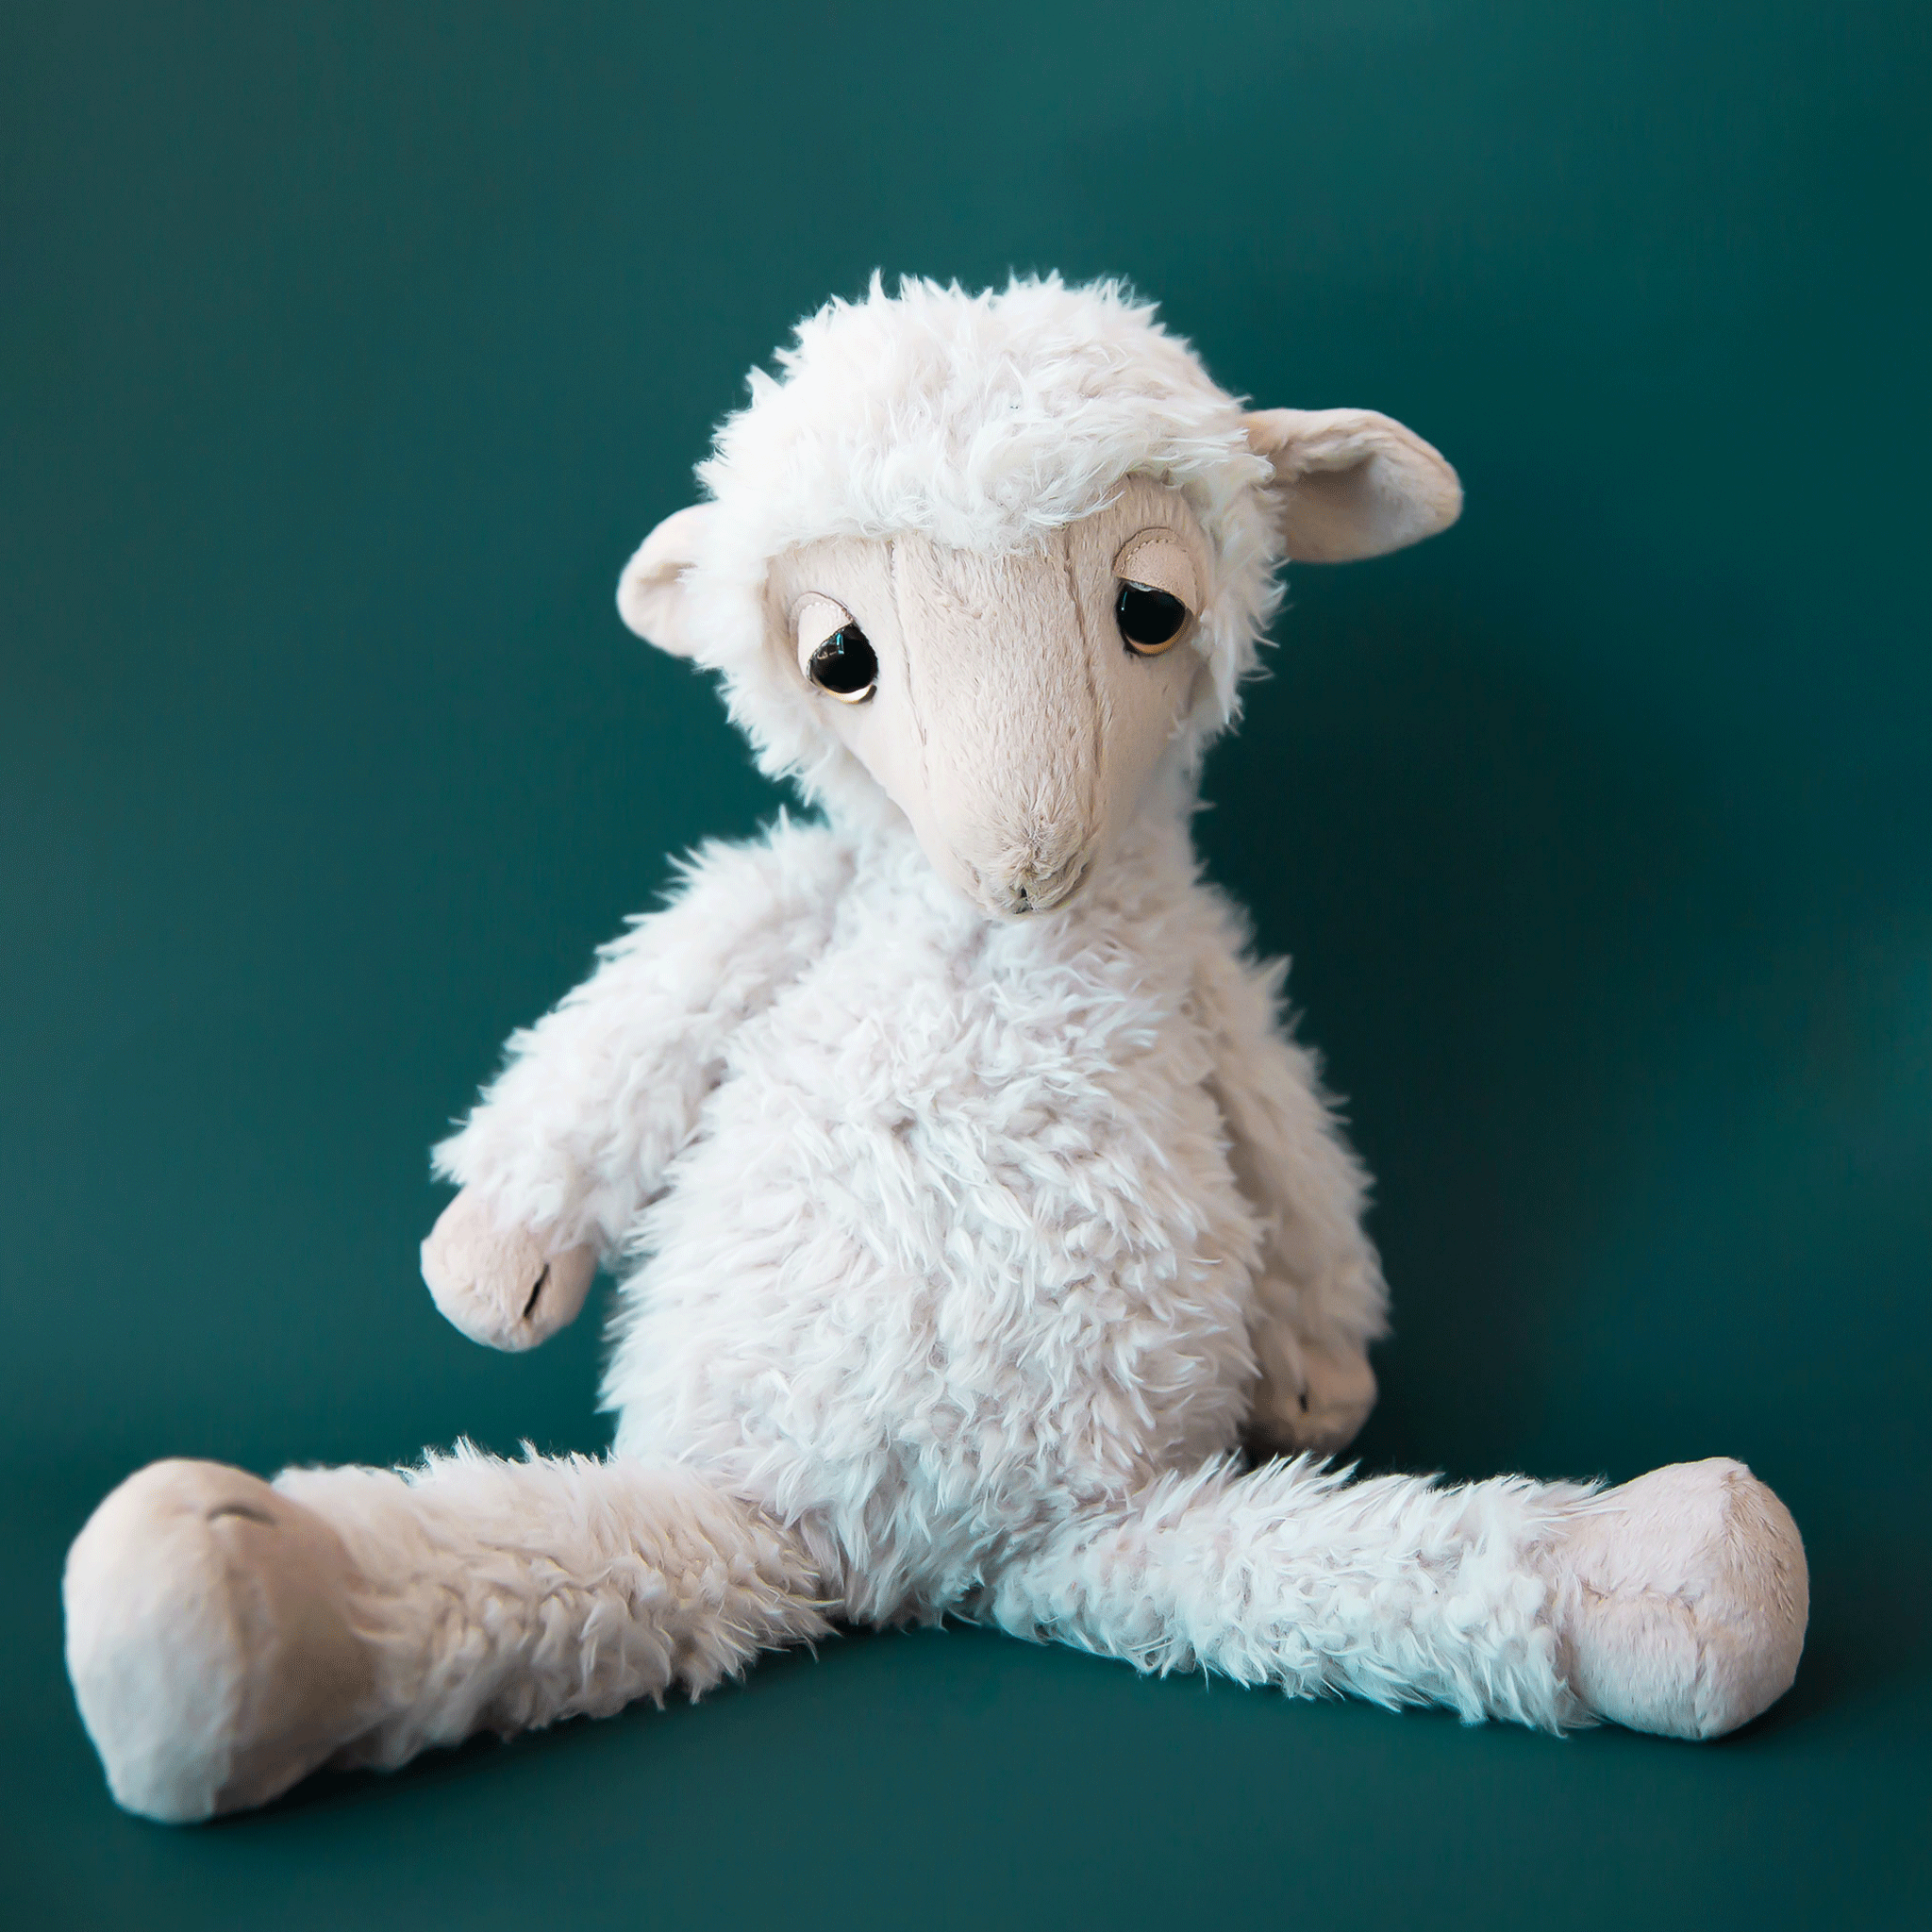 On a teal background is an ivory stuffed animal sheep with sleepy eyes.